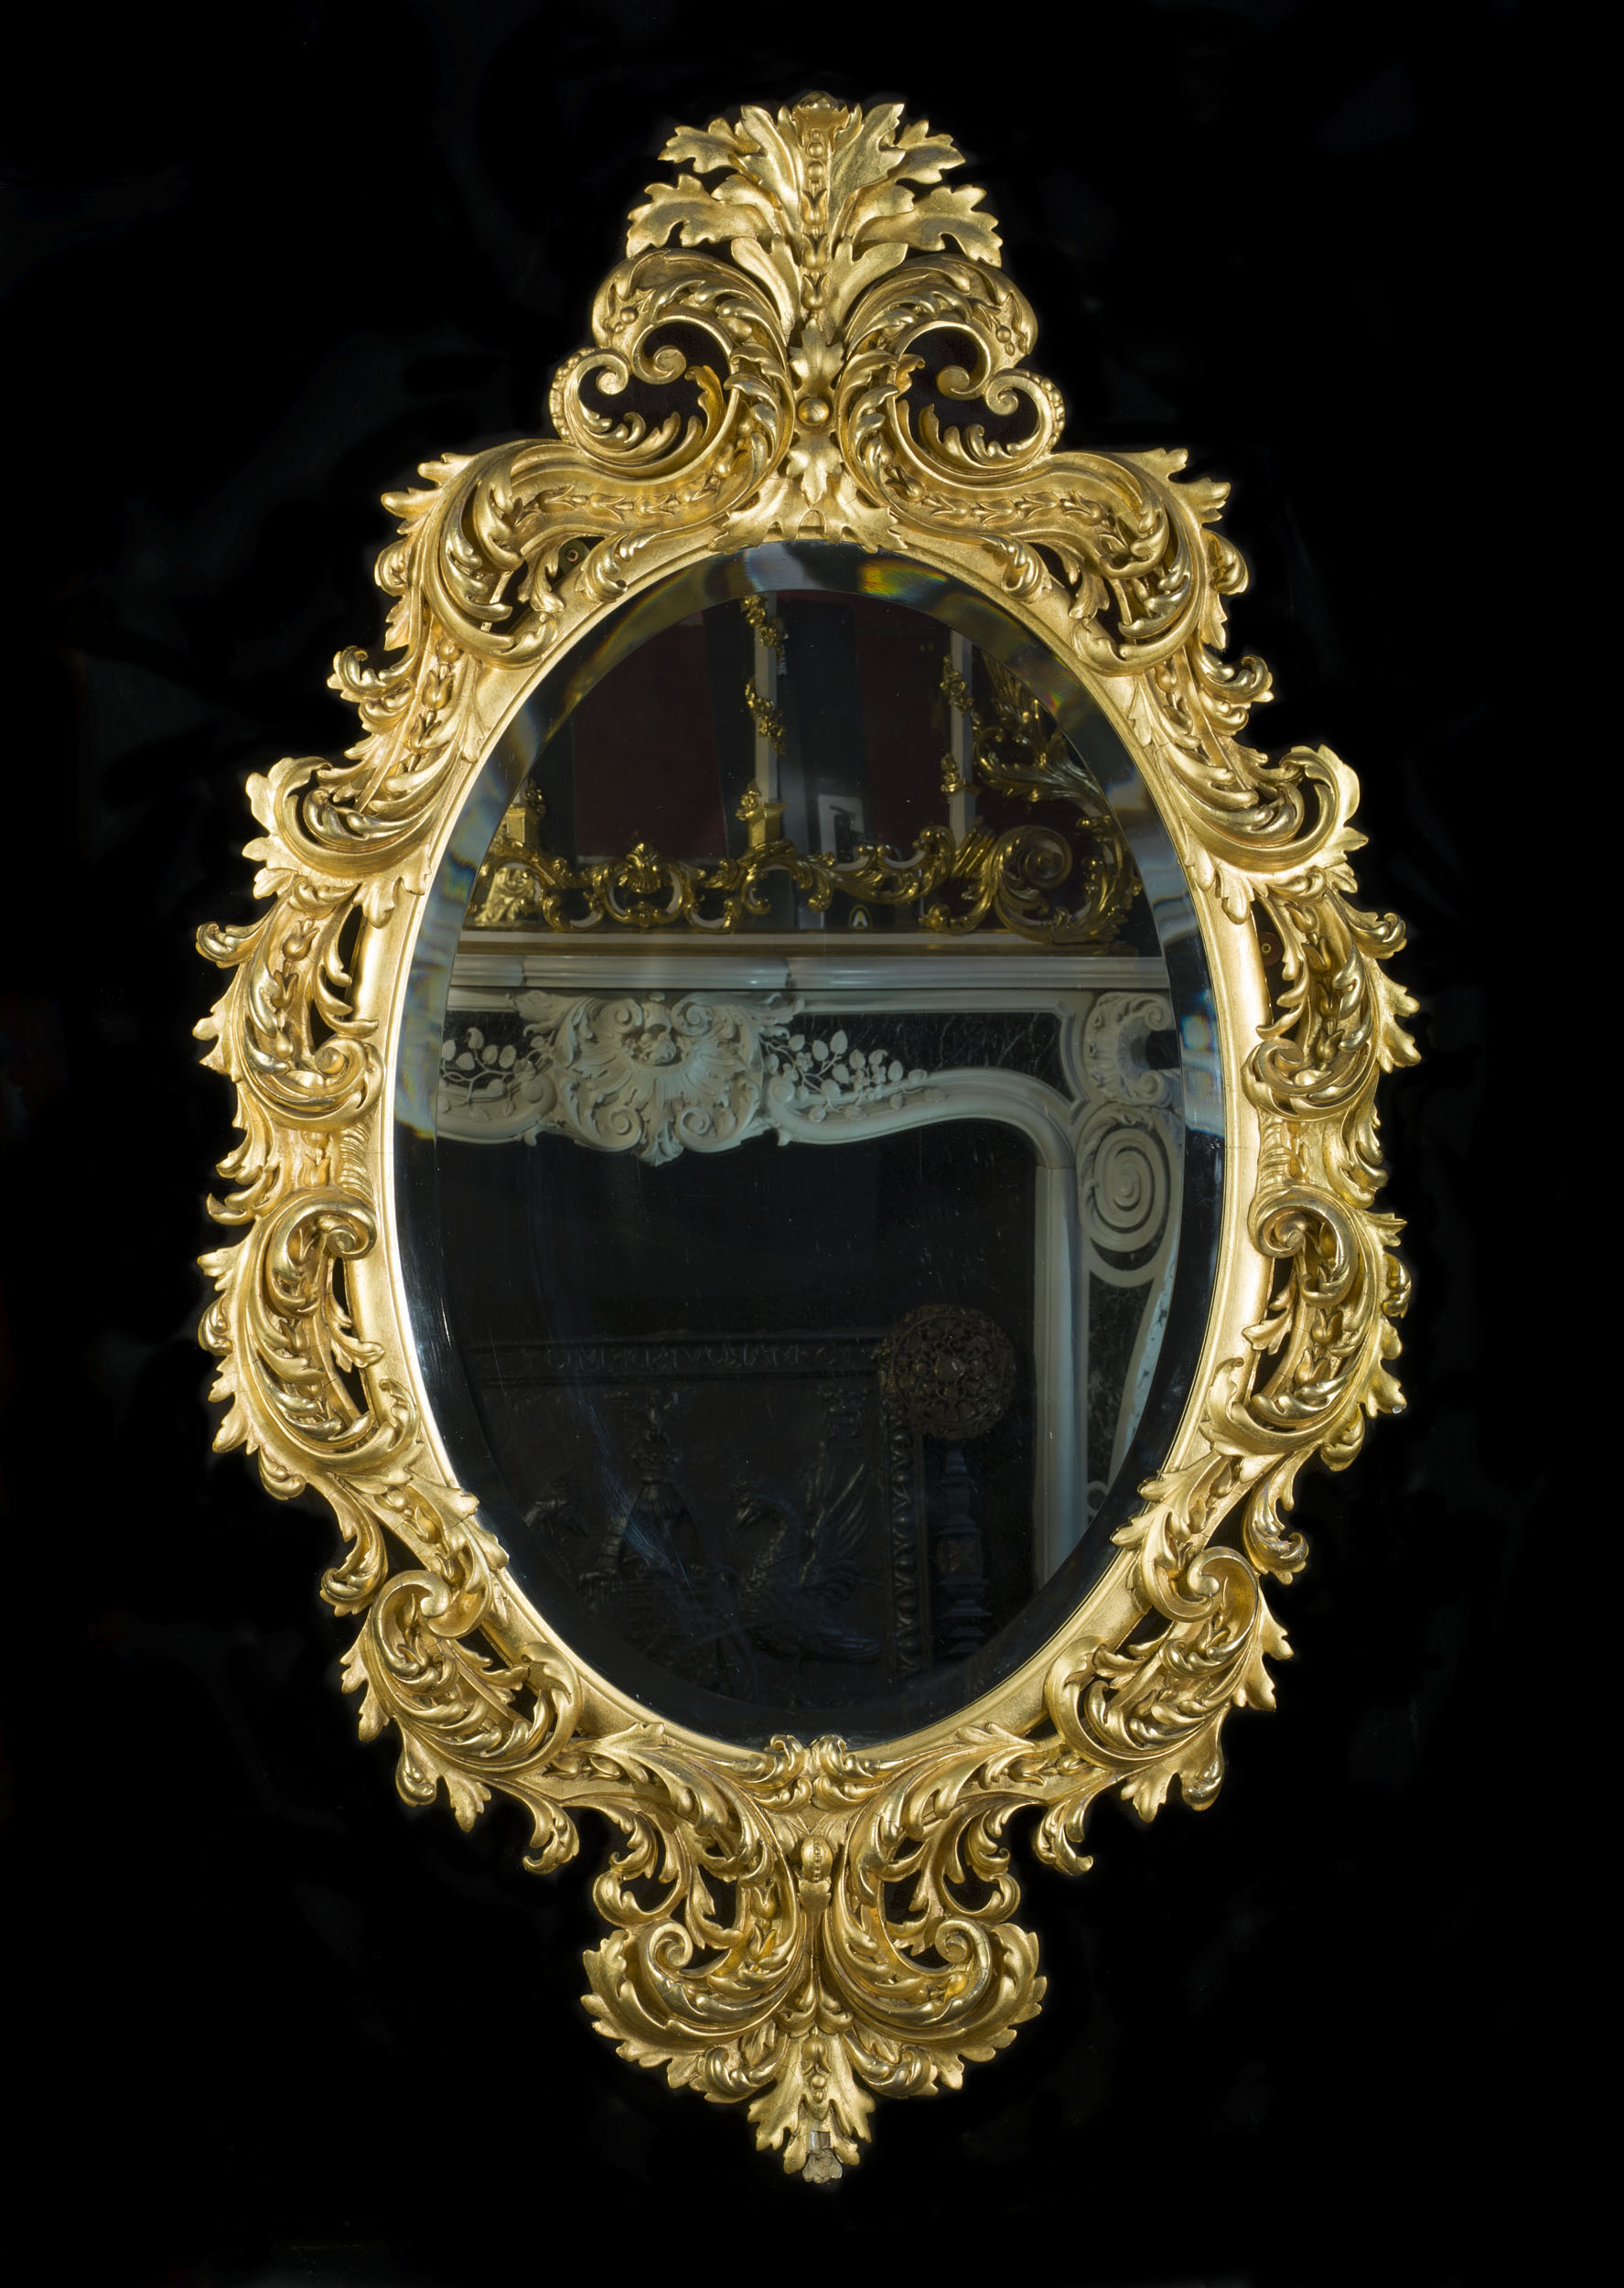 An Ornate Rococo Style Giltwood Wall Mirror